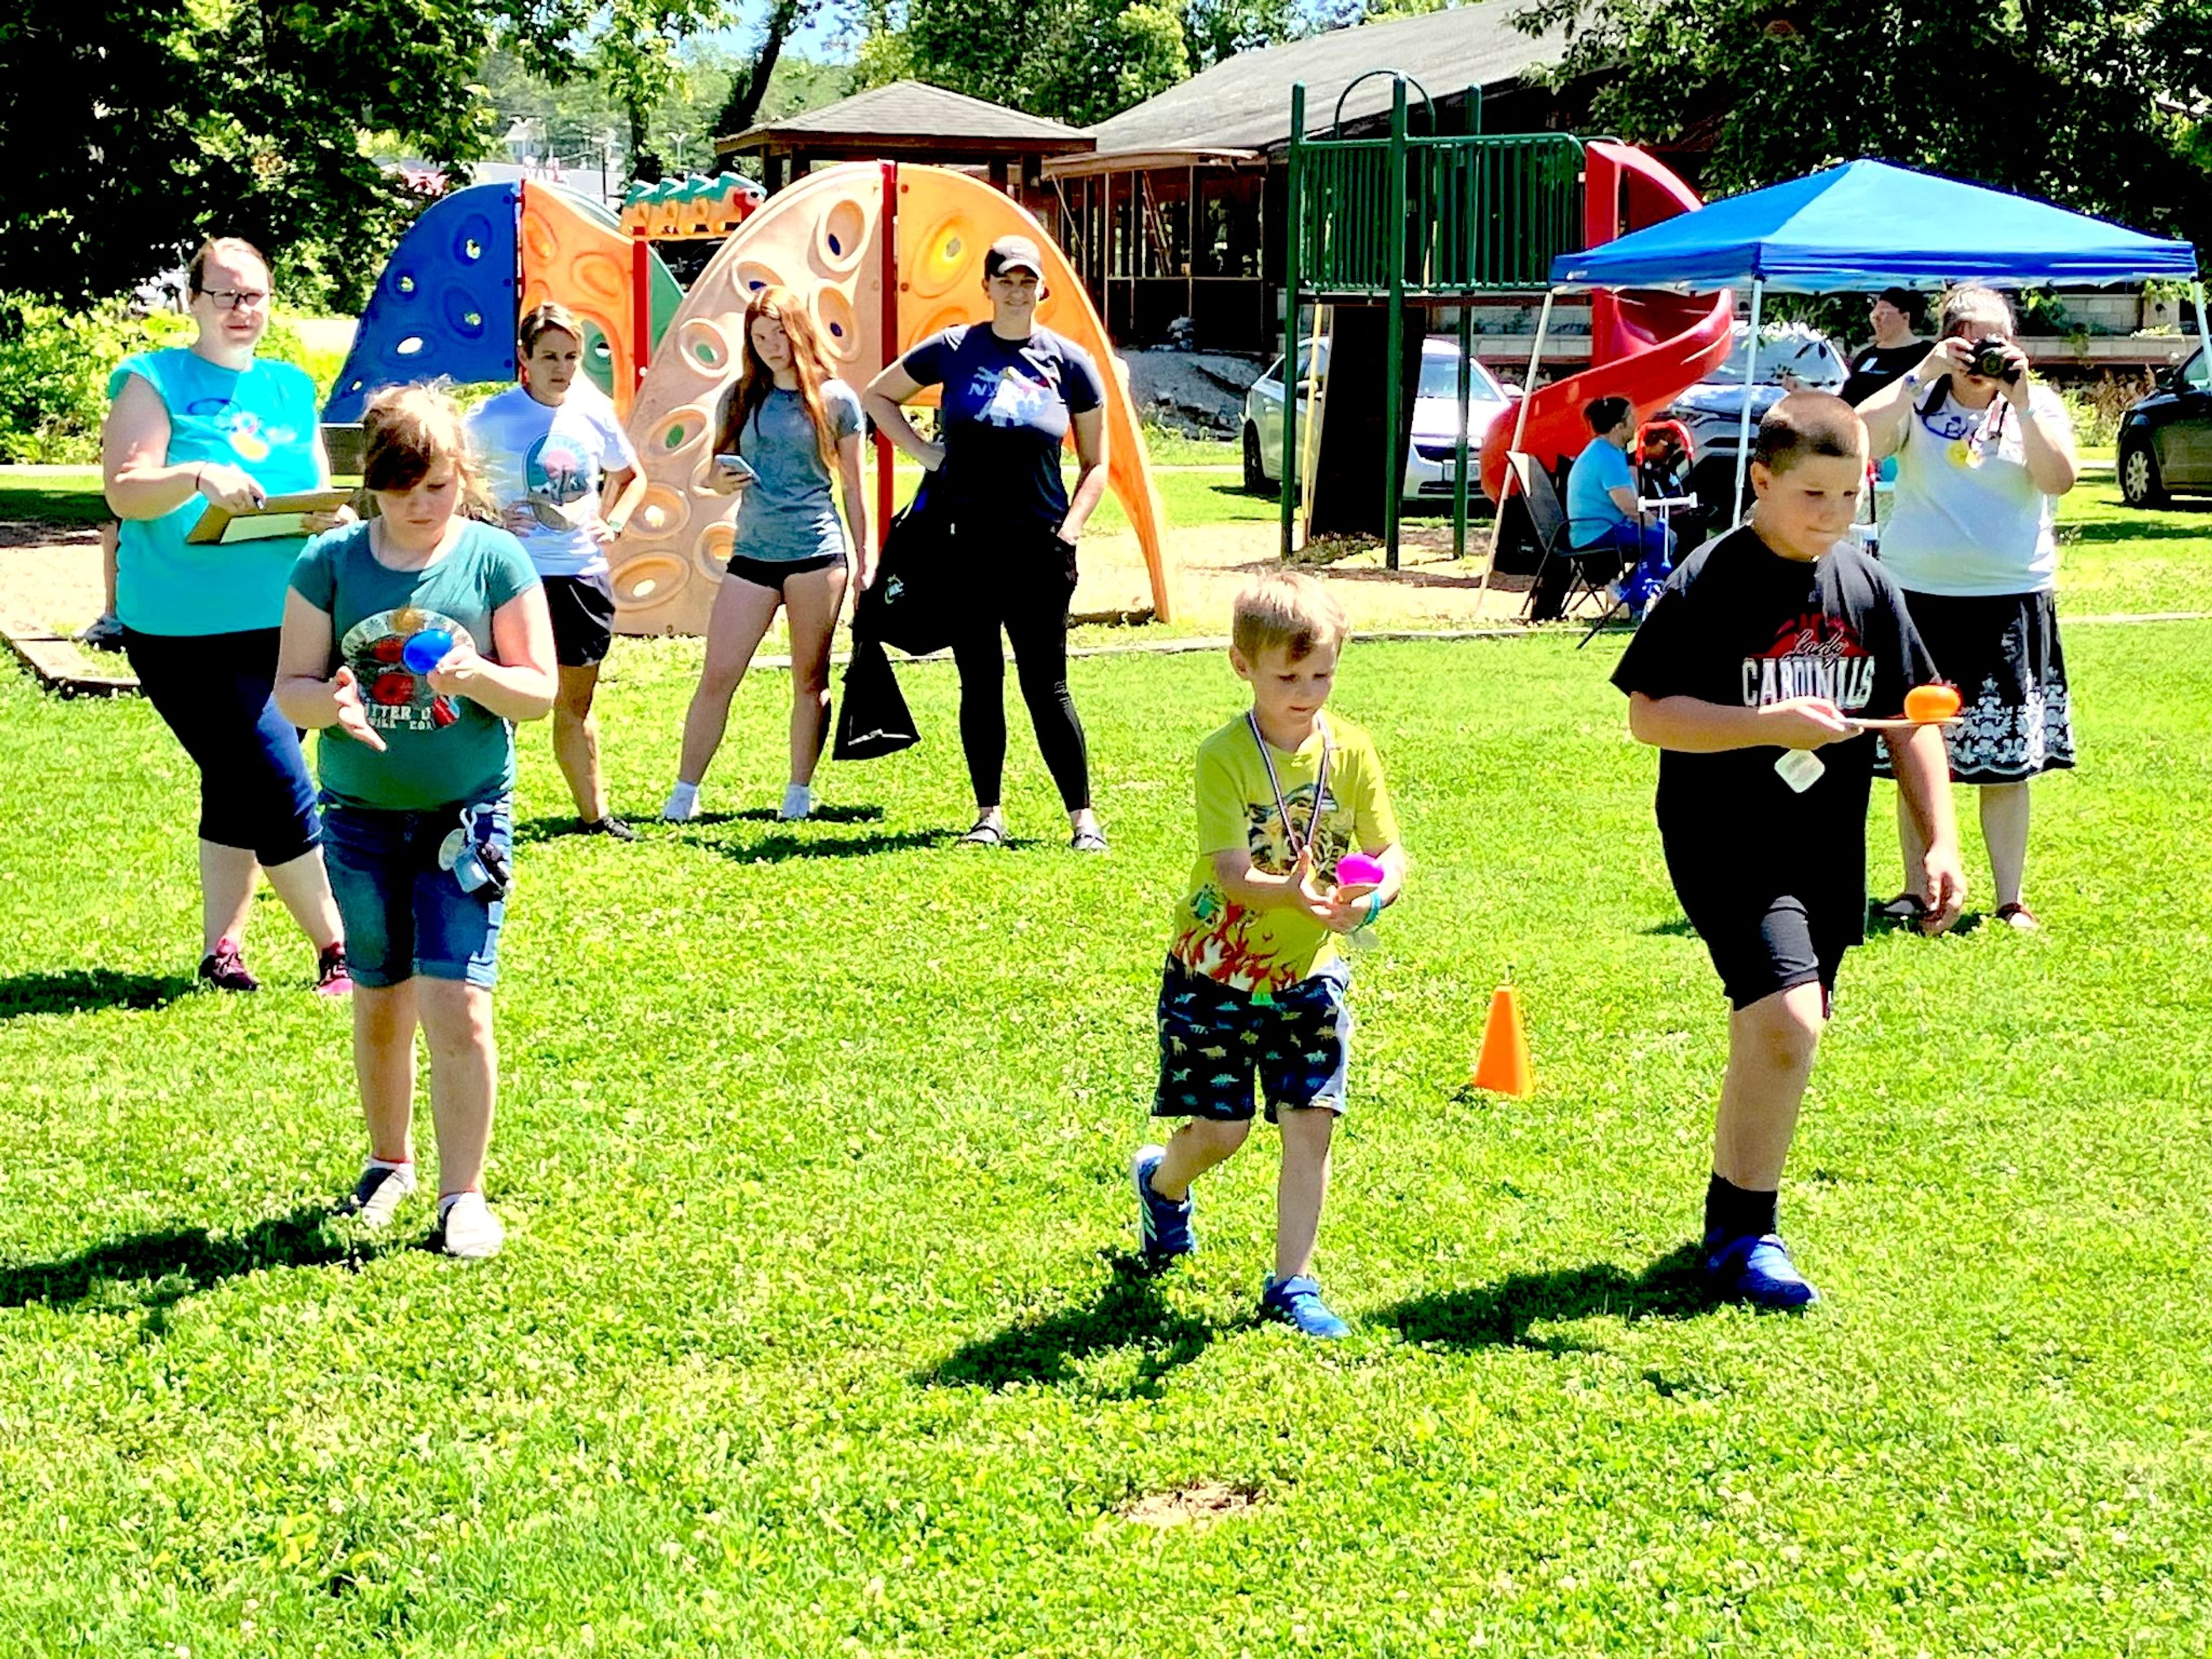 
Youngsters participate in an egg relay race during the 18th annual Bollinger County Resource Fair hosted by Bollinger County Children and Youth Issues Coalition.